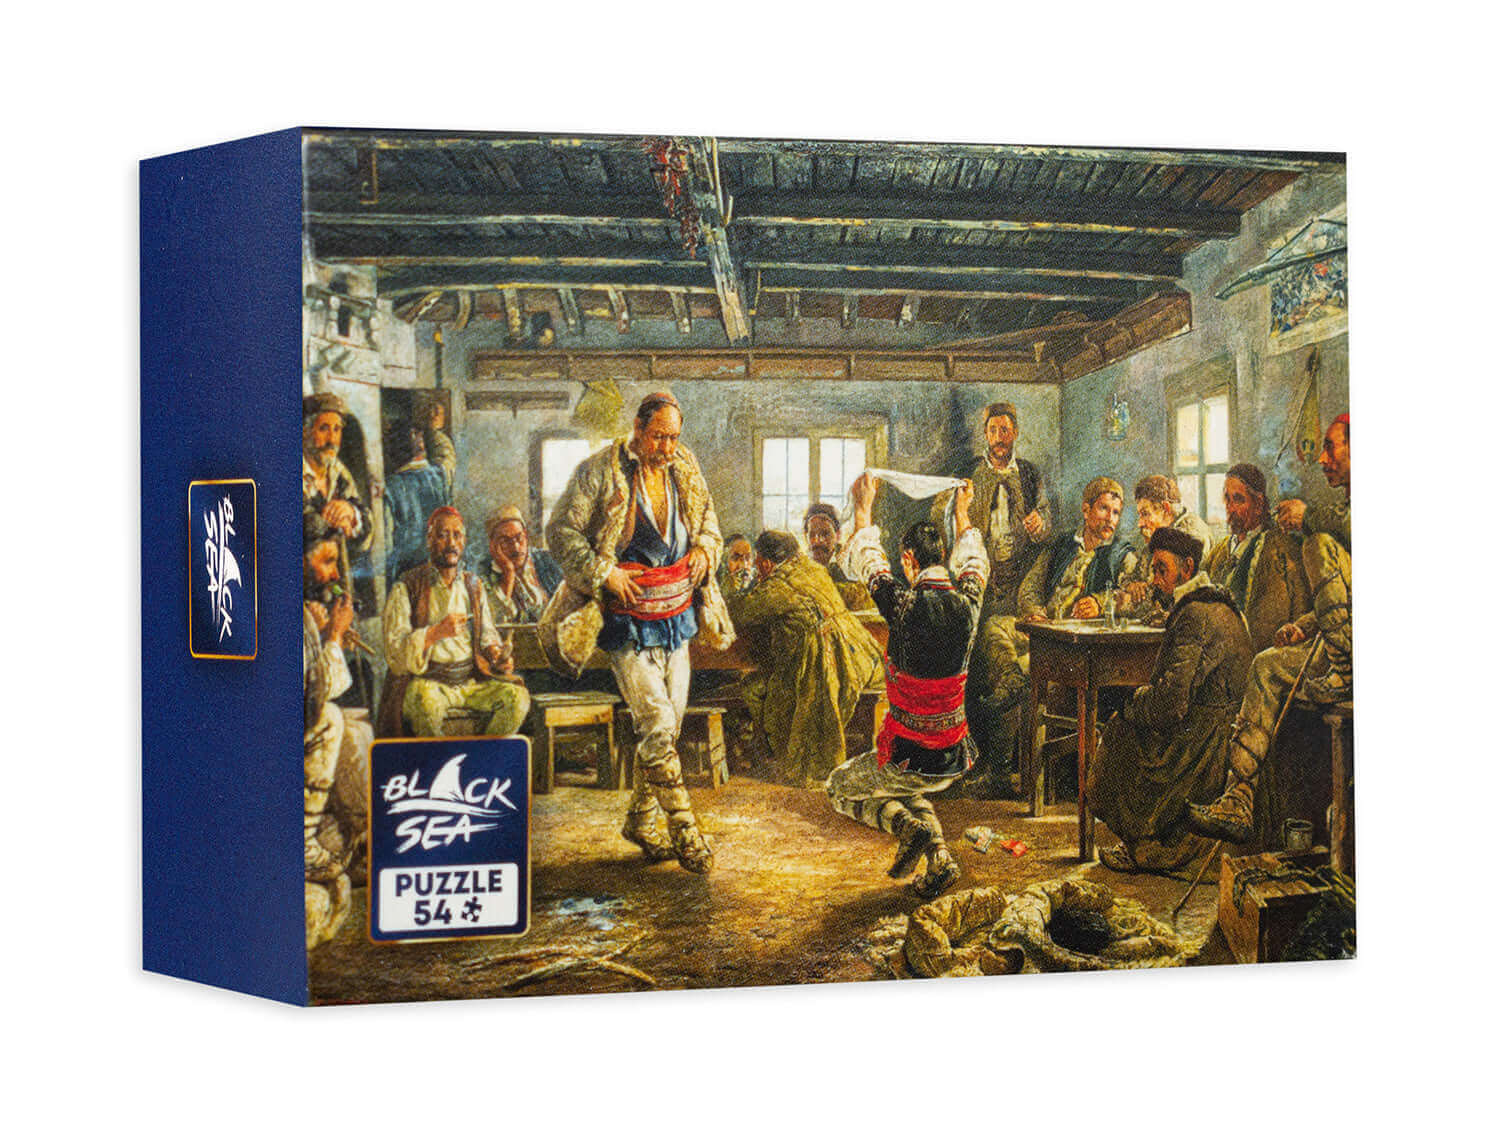 Mini puzzle Black sea 54 pieces - Ruchenitsa, James D. Bourchier, a correspondent for The Times in Bulgaria, was a vivid fan of the country. Perhaps it was fate that brought him together with two other distinguished men in the tavern in the village of Bis